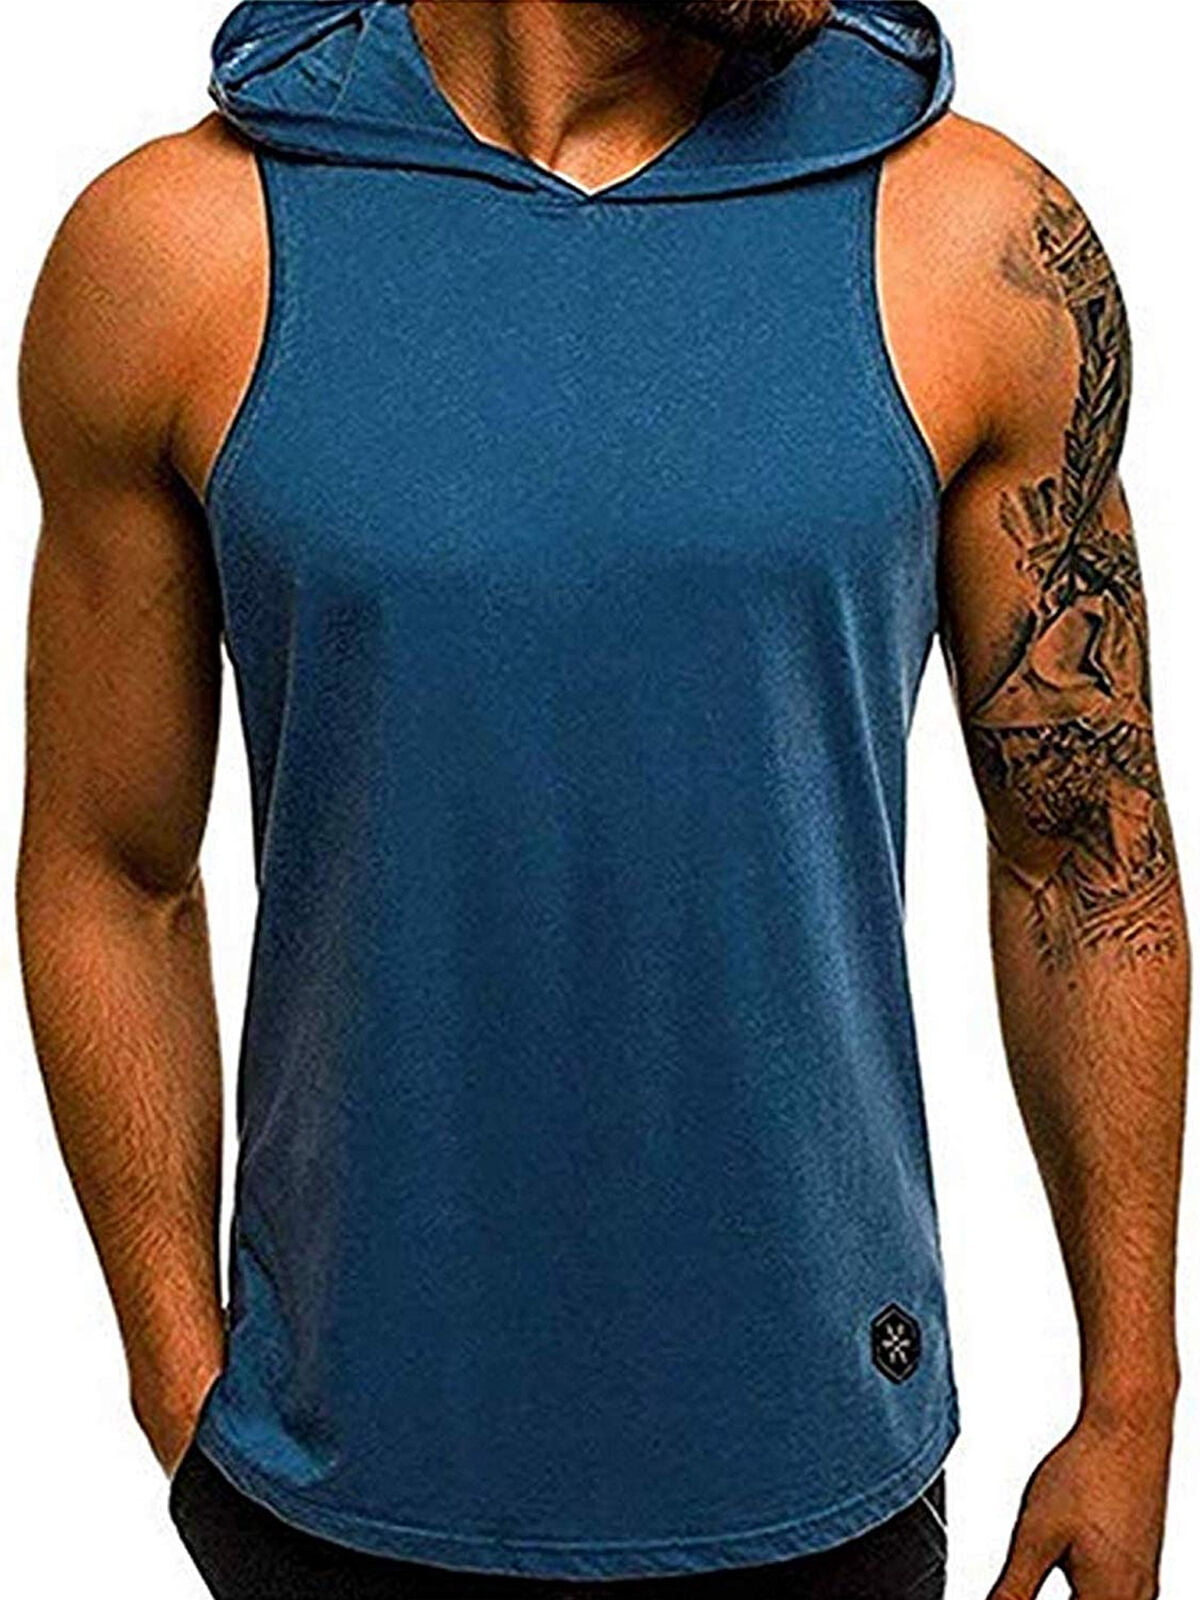 Diconna - Men Gym Hoodie Shirt Muscle Sleeveless Tank Top Hooded ...